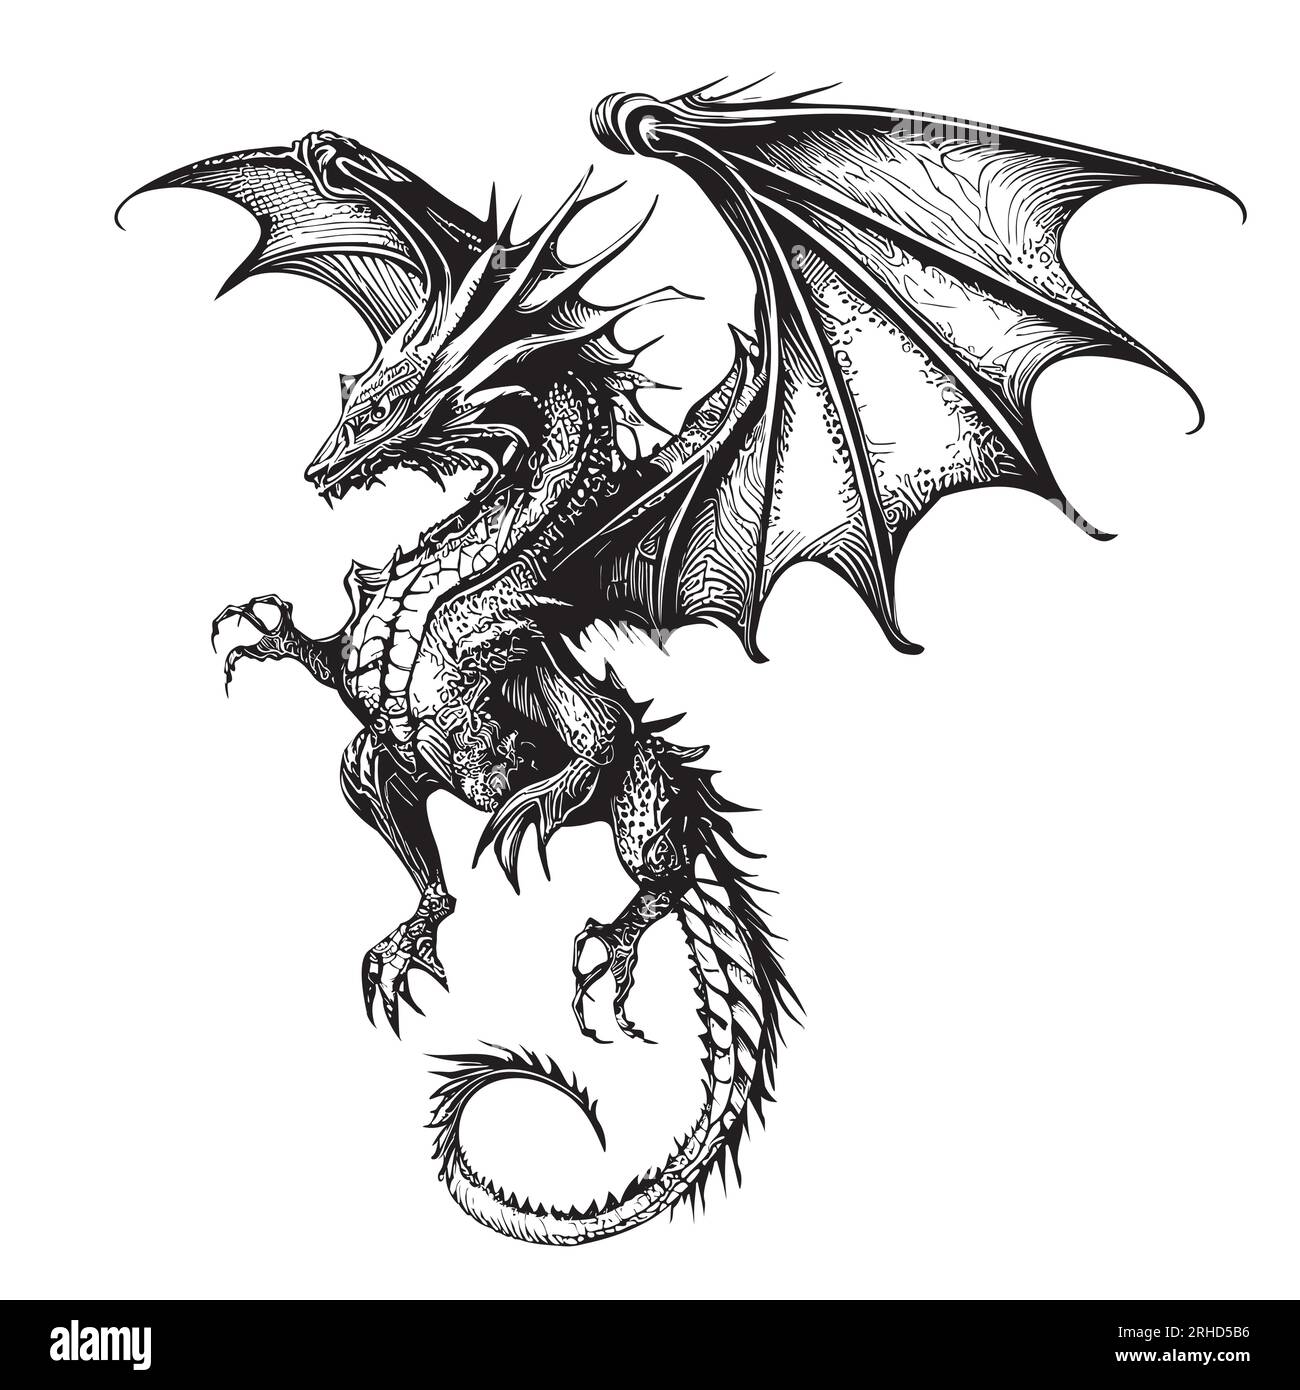 The Art Of Drawing Dragons Drawing Kit Anime Art. Mythical Dragons. New